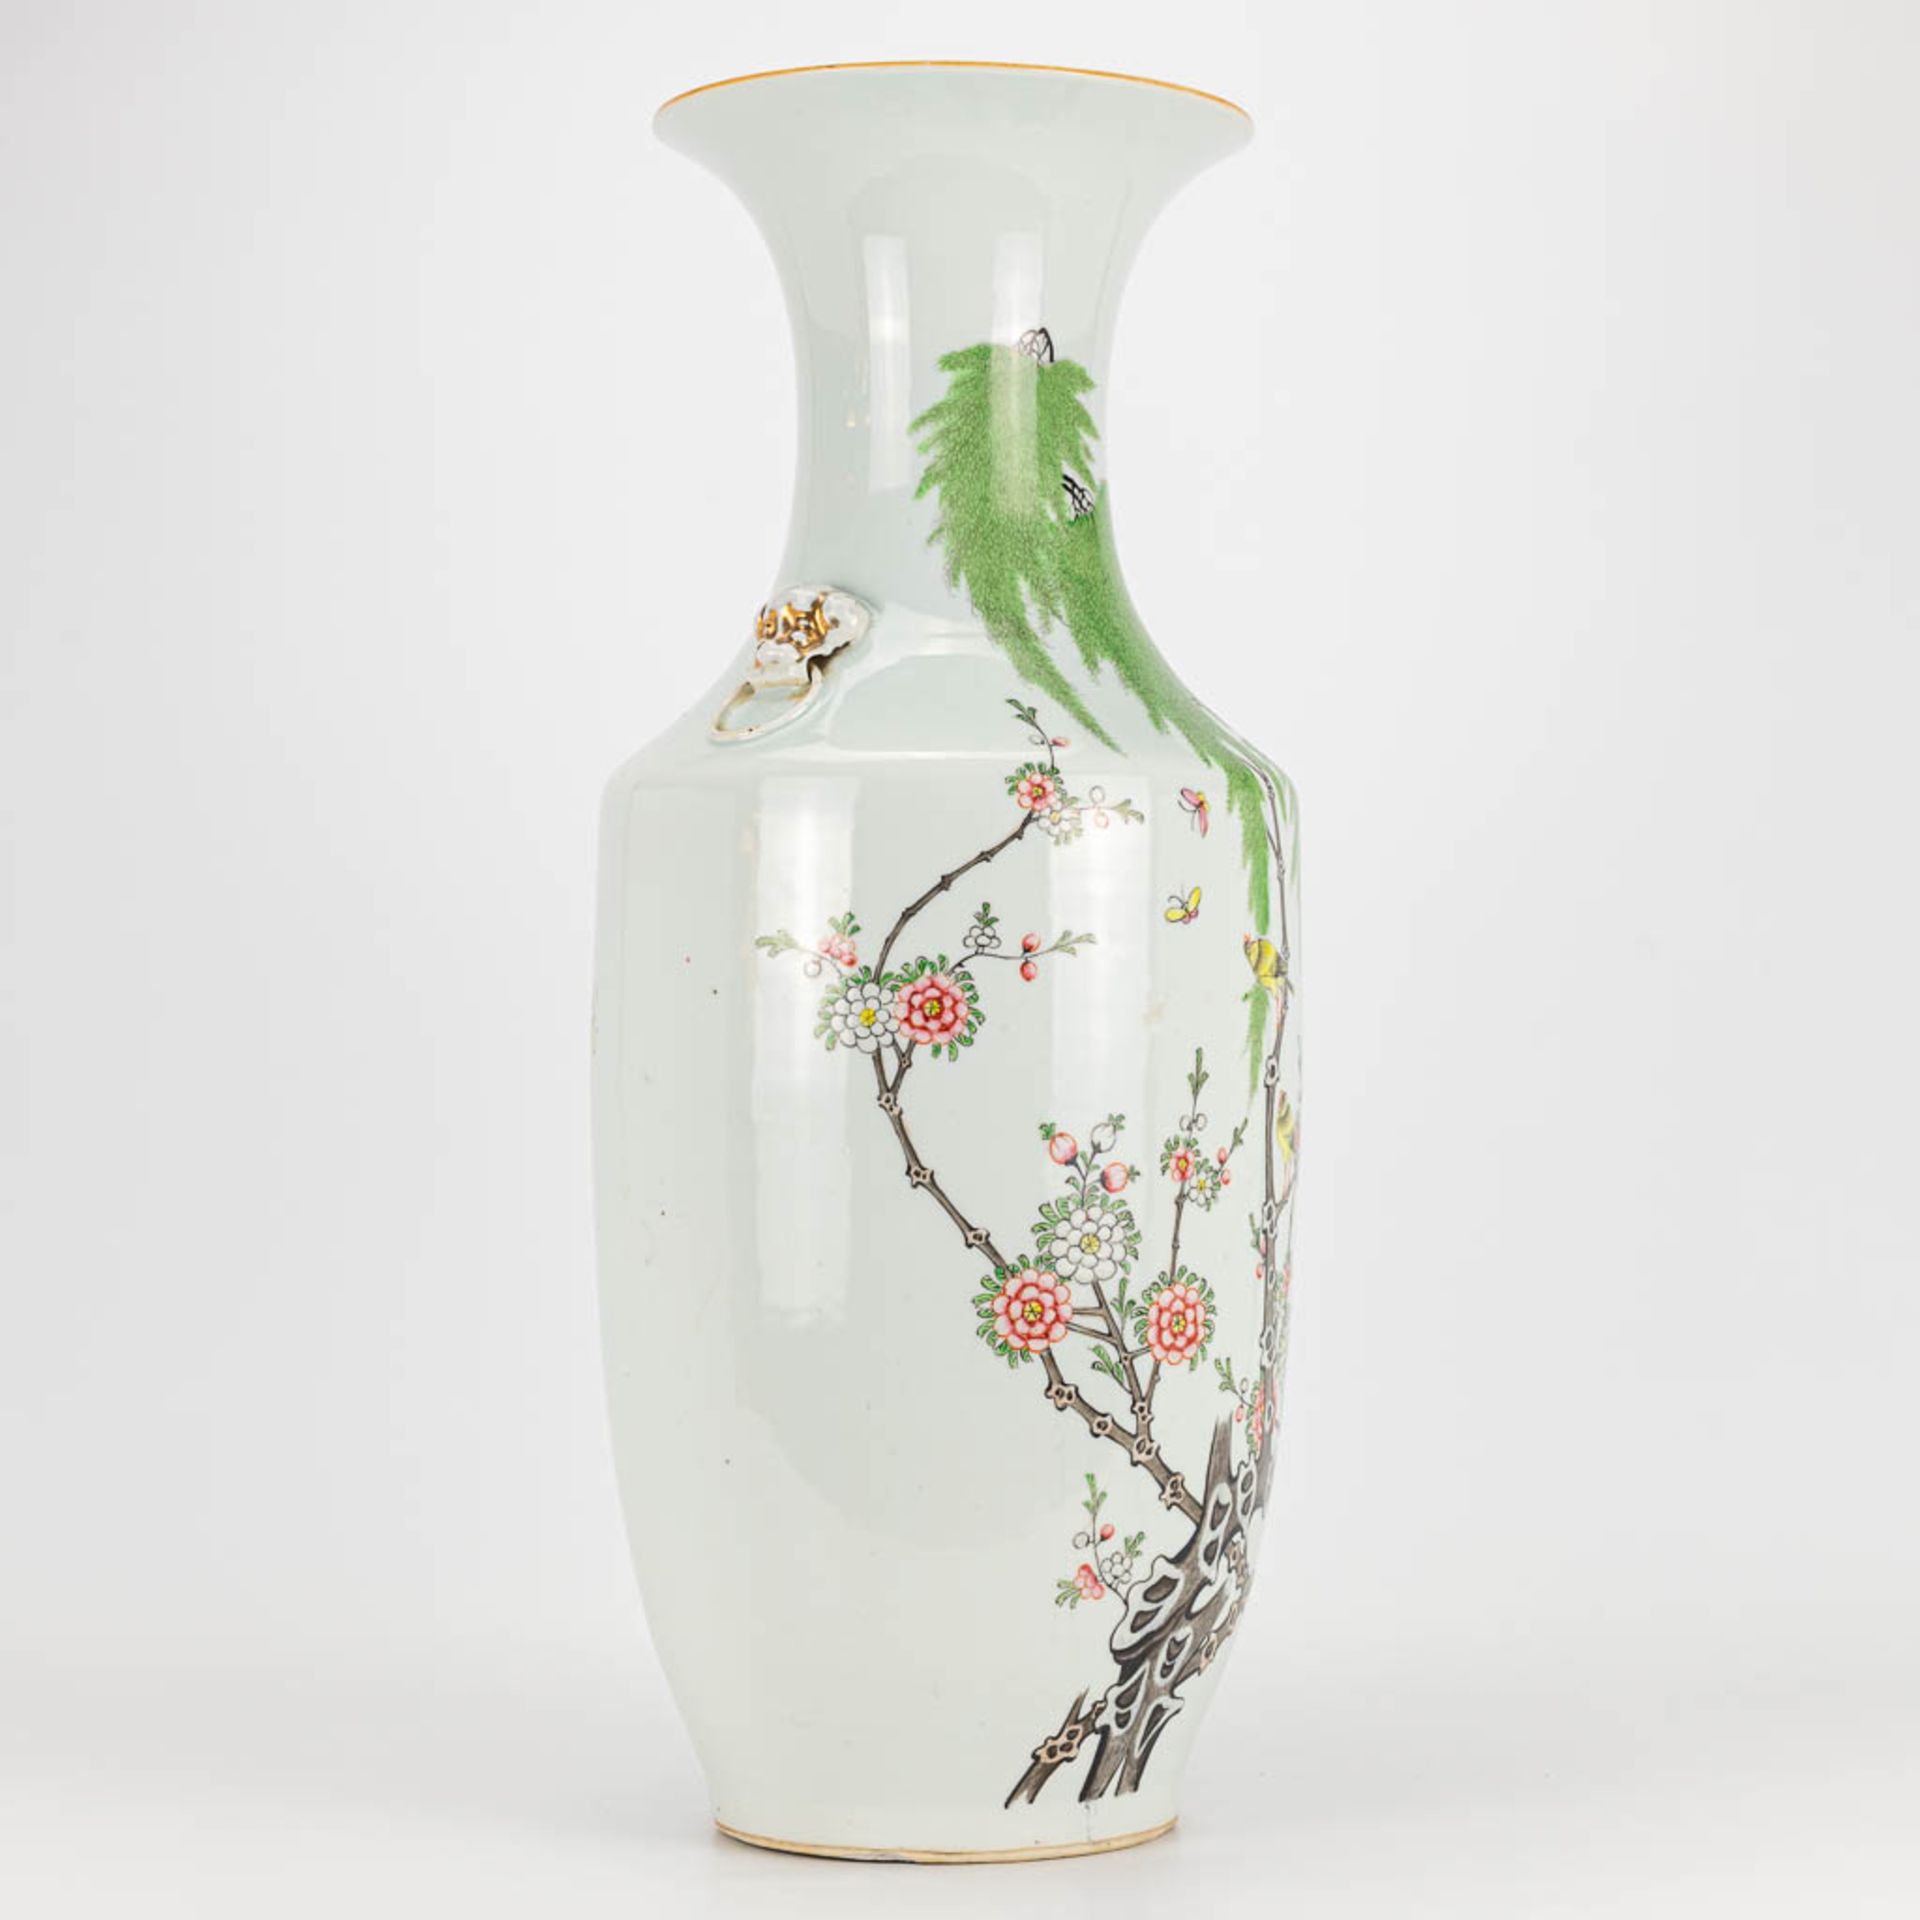 A vase made of Chinese porcelain and decorated with flowers and birds. - Image 2 of 16